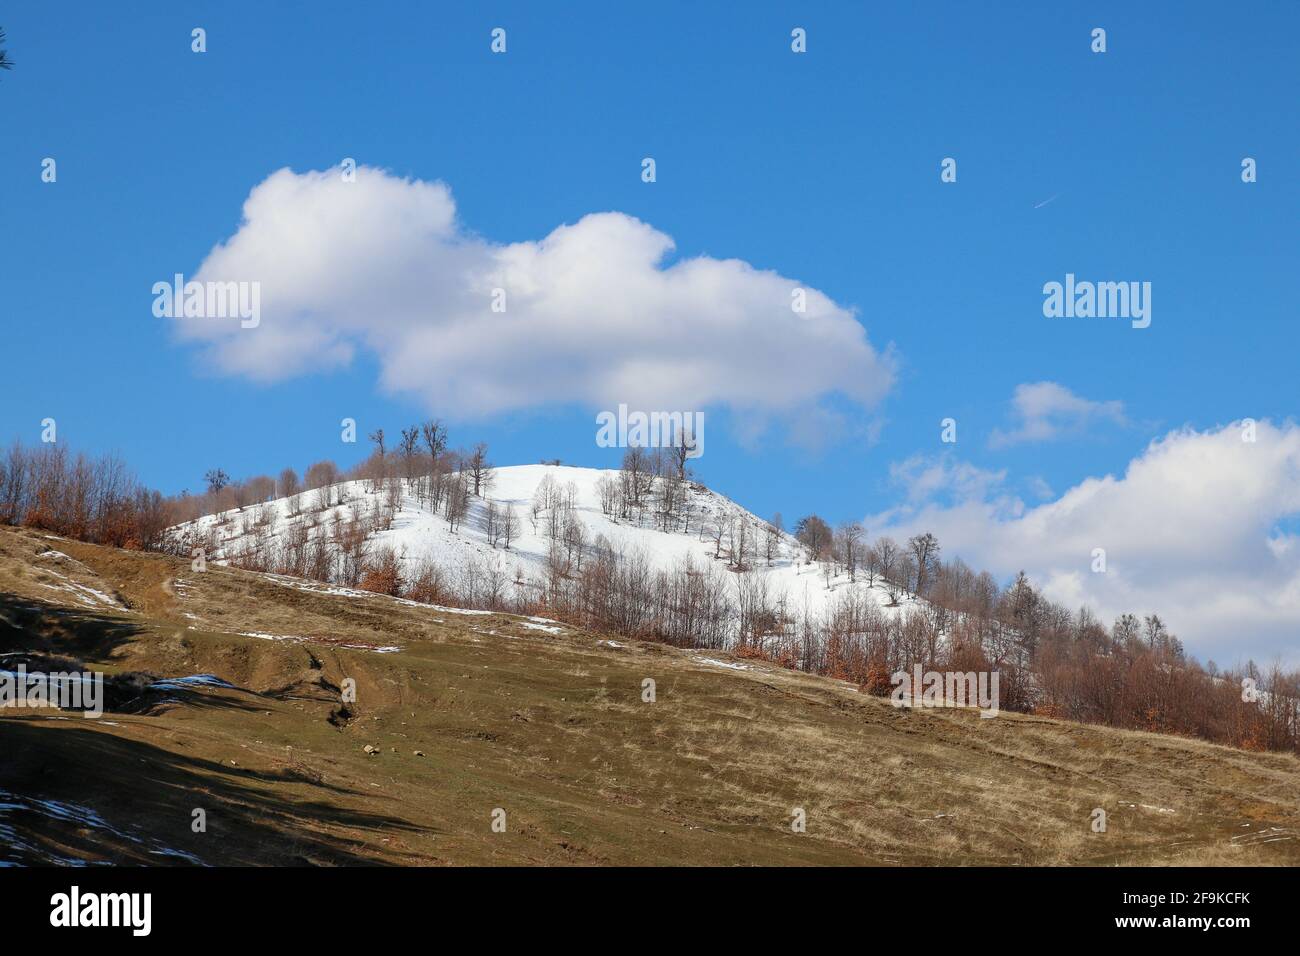 Field with blue sky in background and white clouds Stock Photo